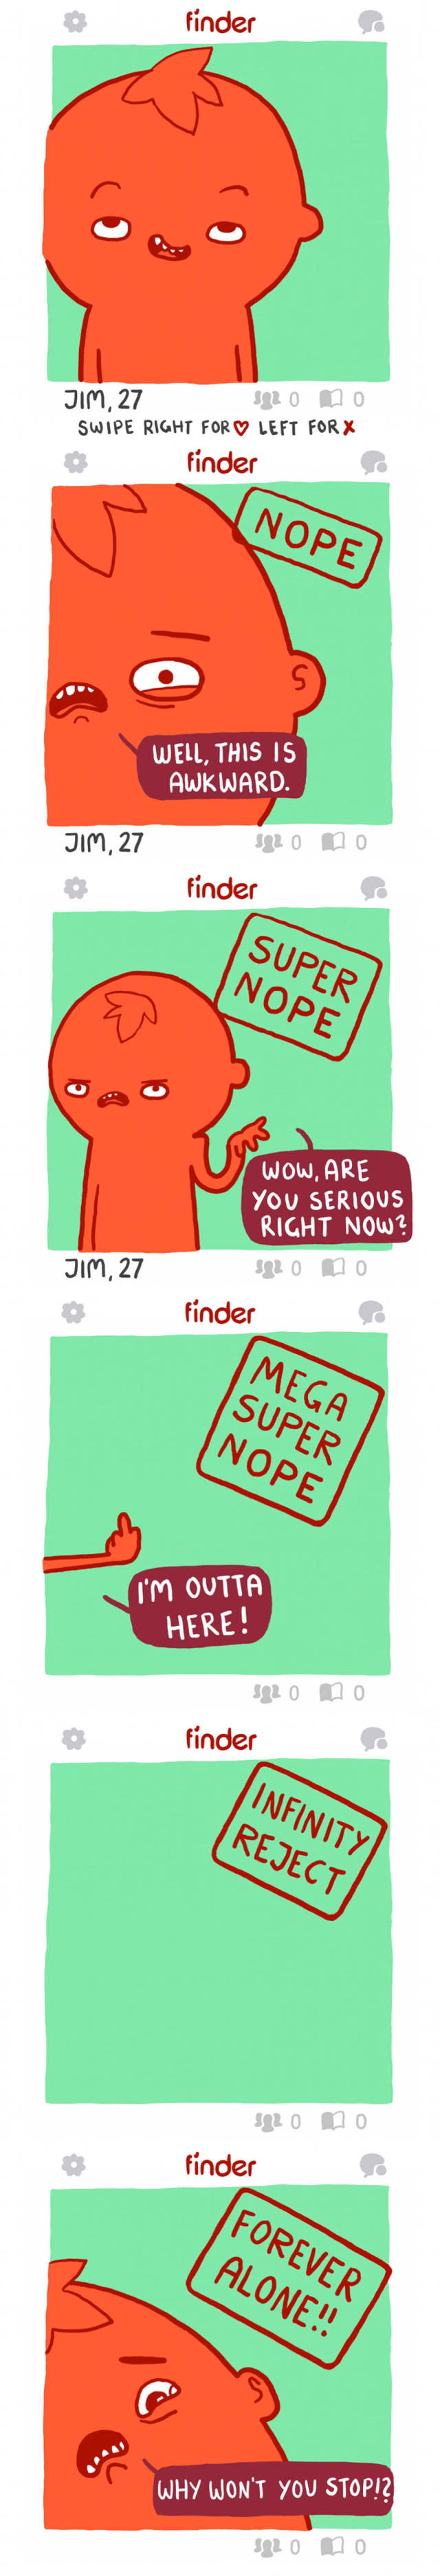 These “Fun Fact” Comics Are Ready To Surprise You With Unexpected Endings!